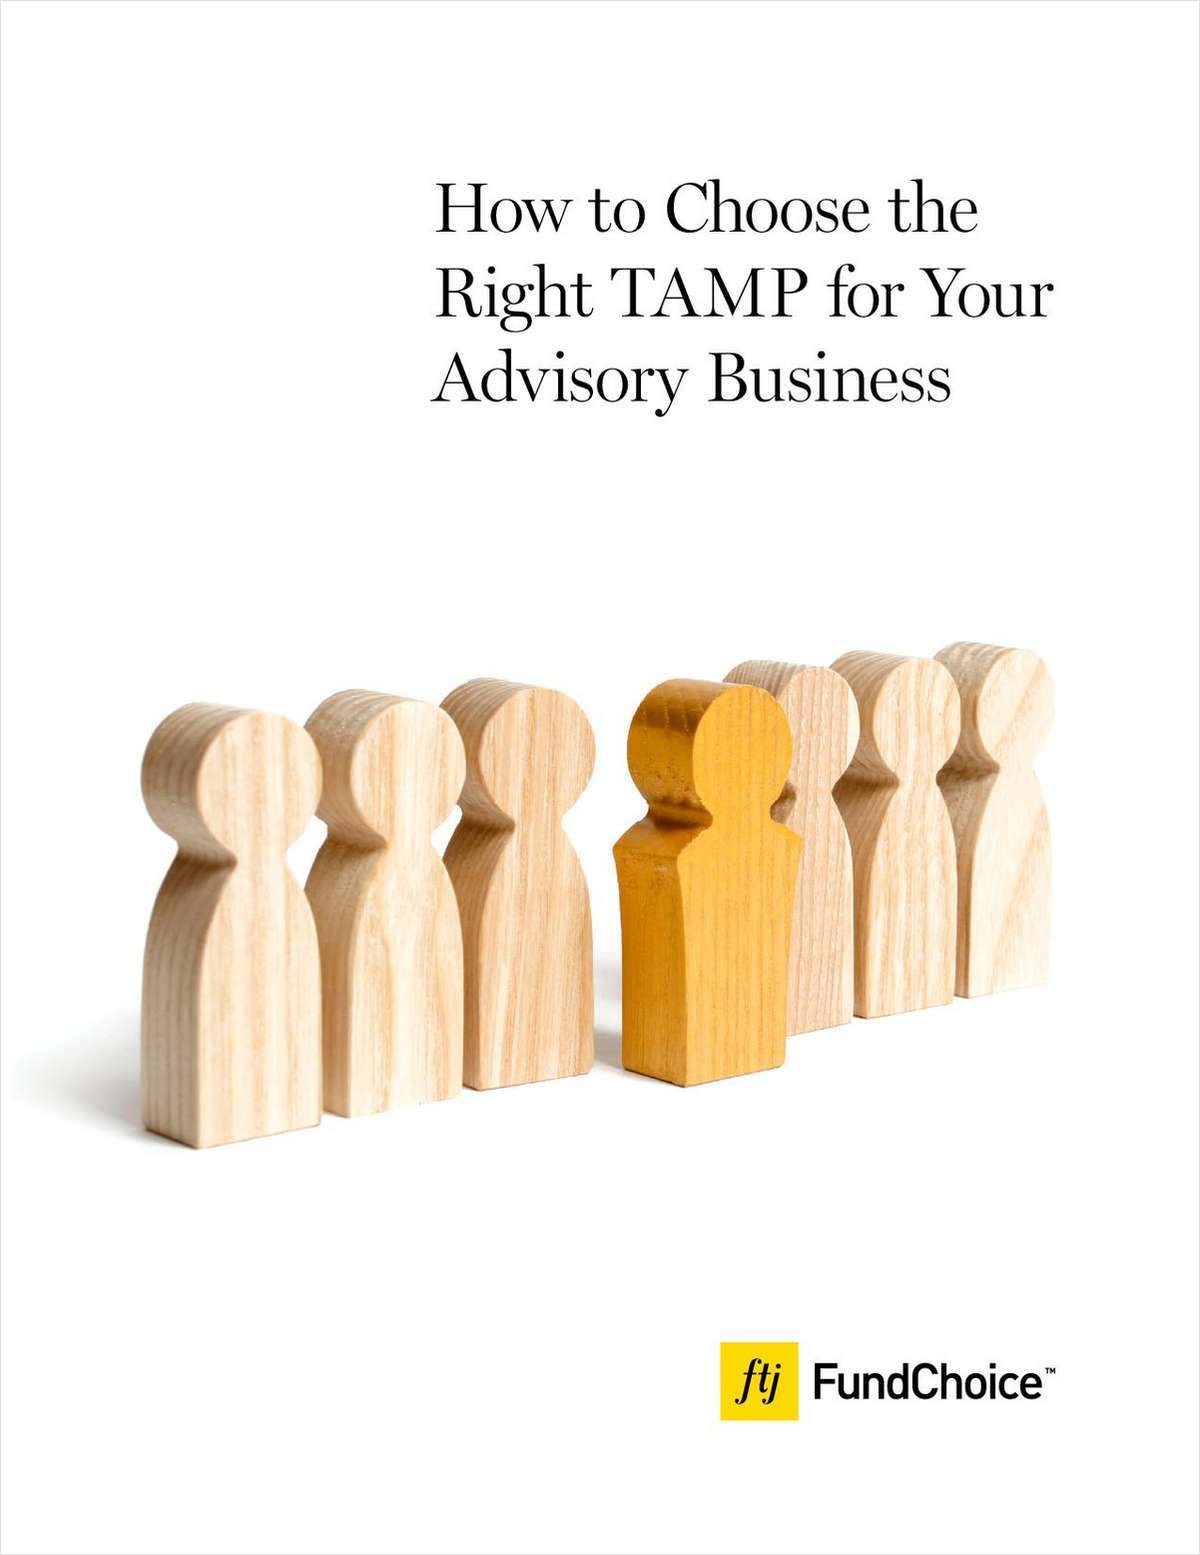 How to Choose the Right TAMP for Your Advisory Business